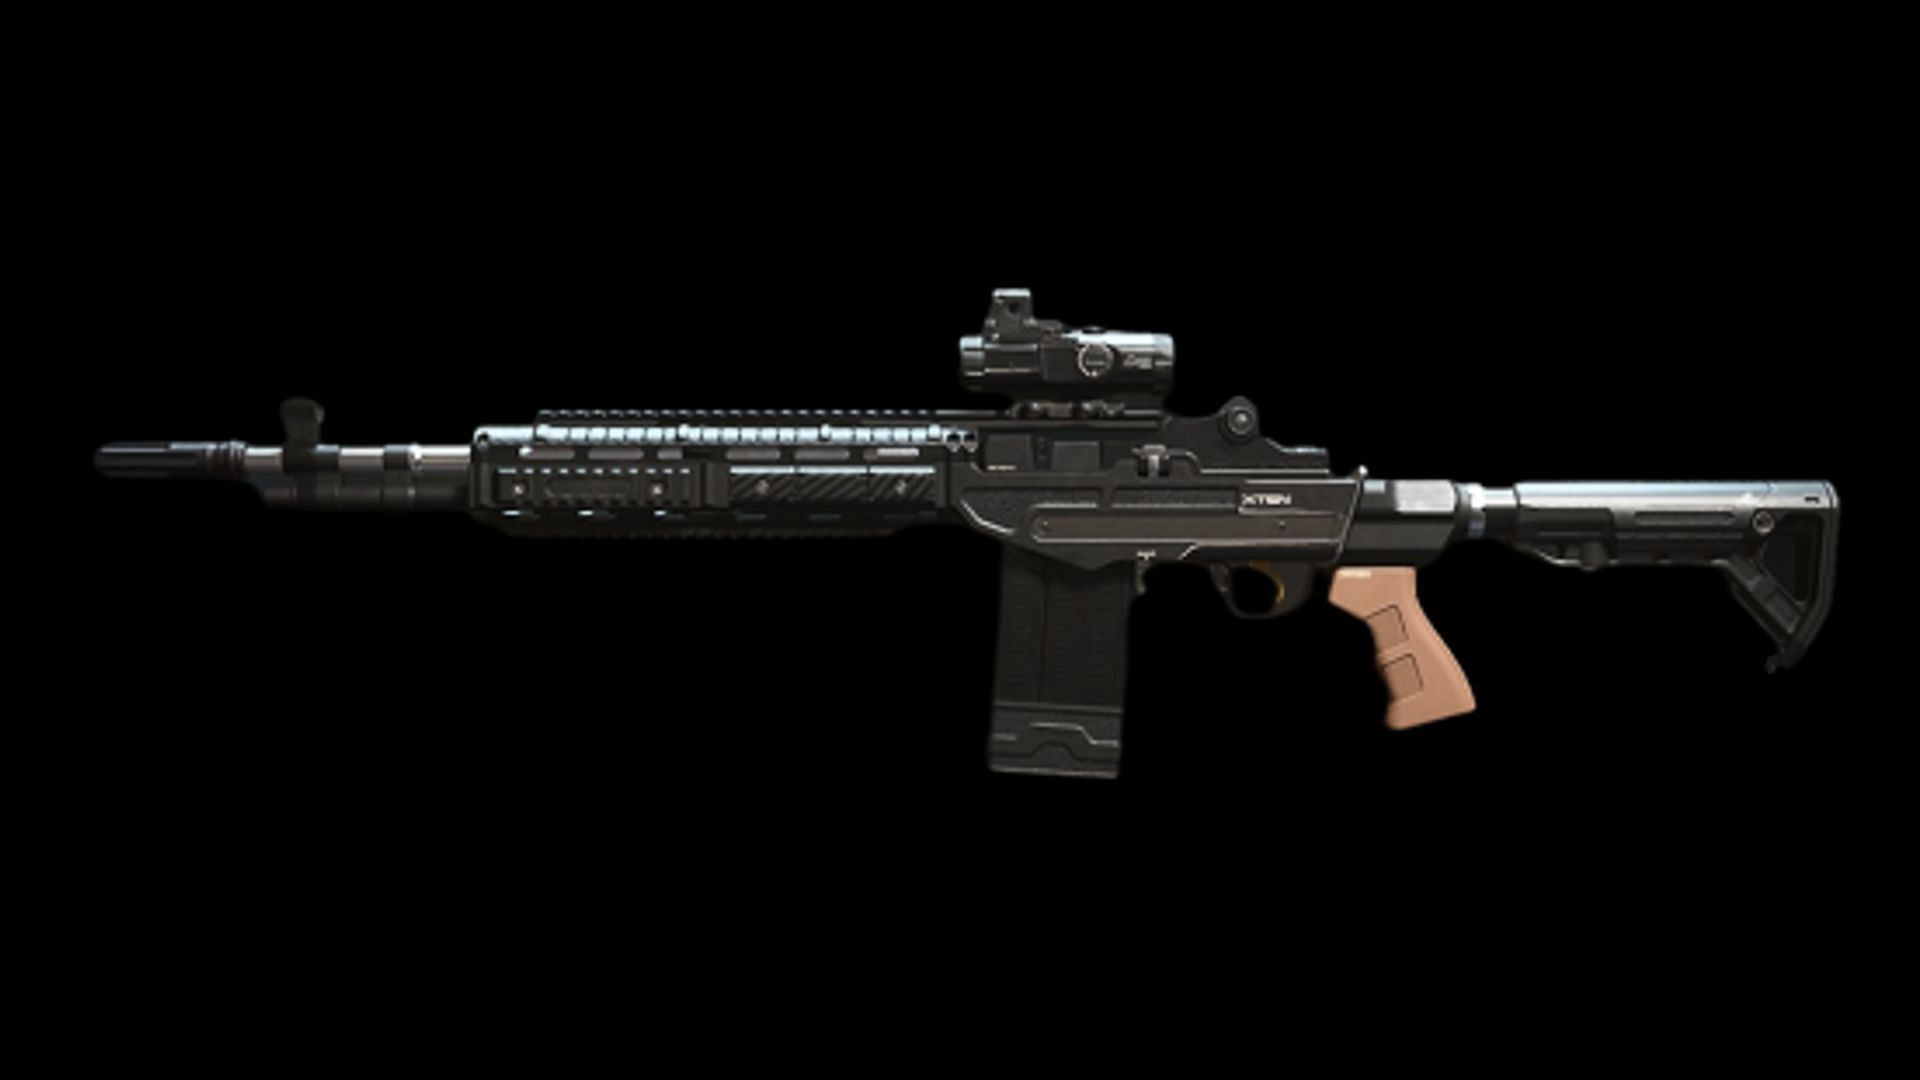 The EBR-14 Marksman Rifle in MW2 and DMZ (Image via Activision)